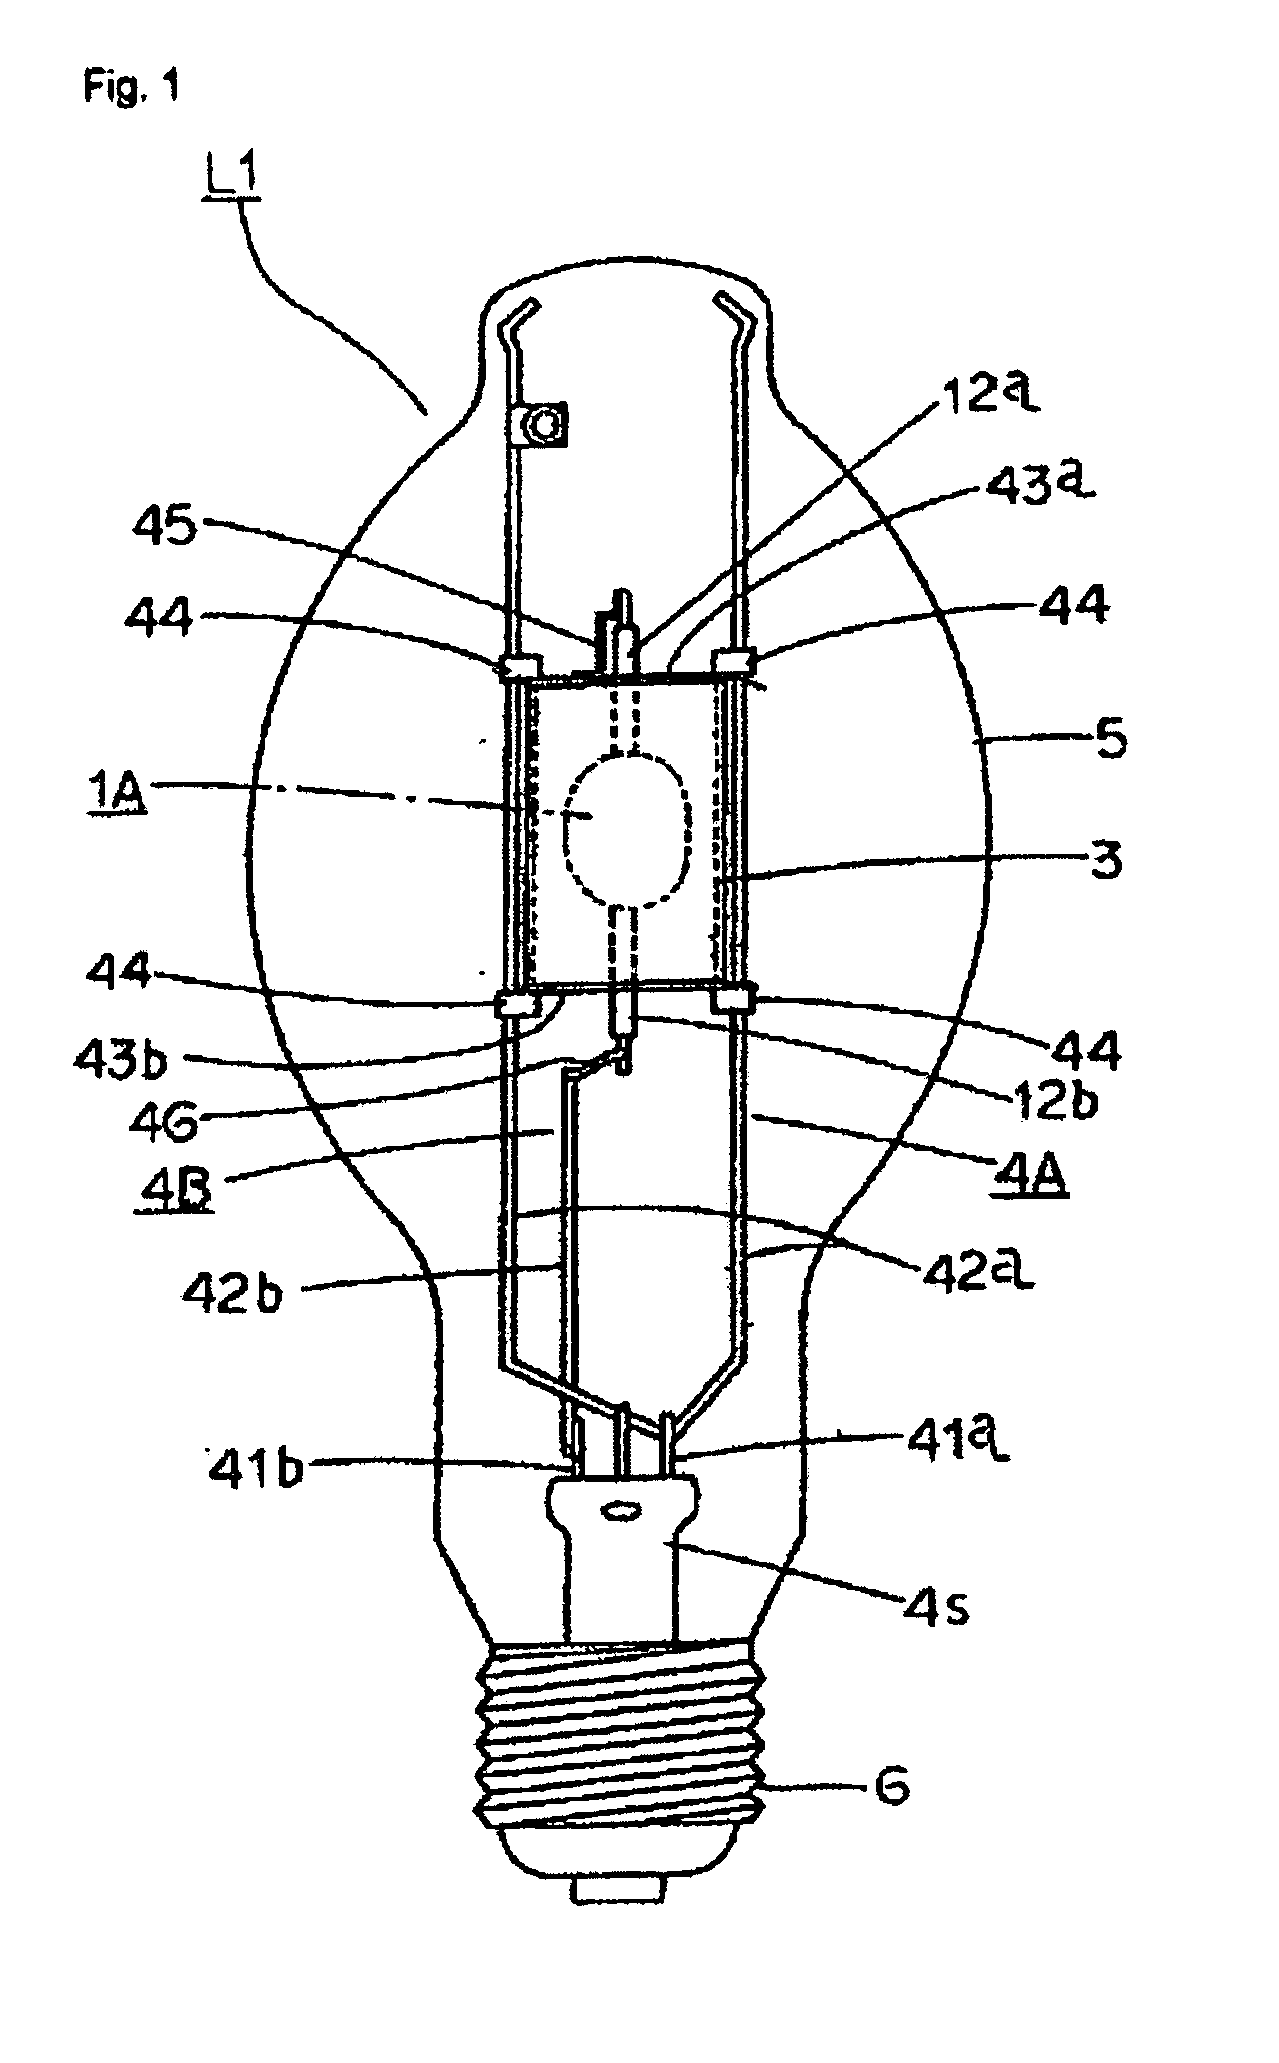 High-intensity discharge lamp and related lighting device